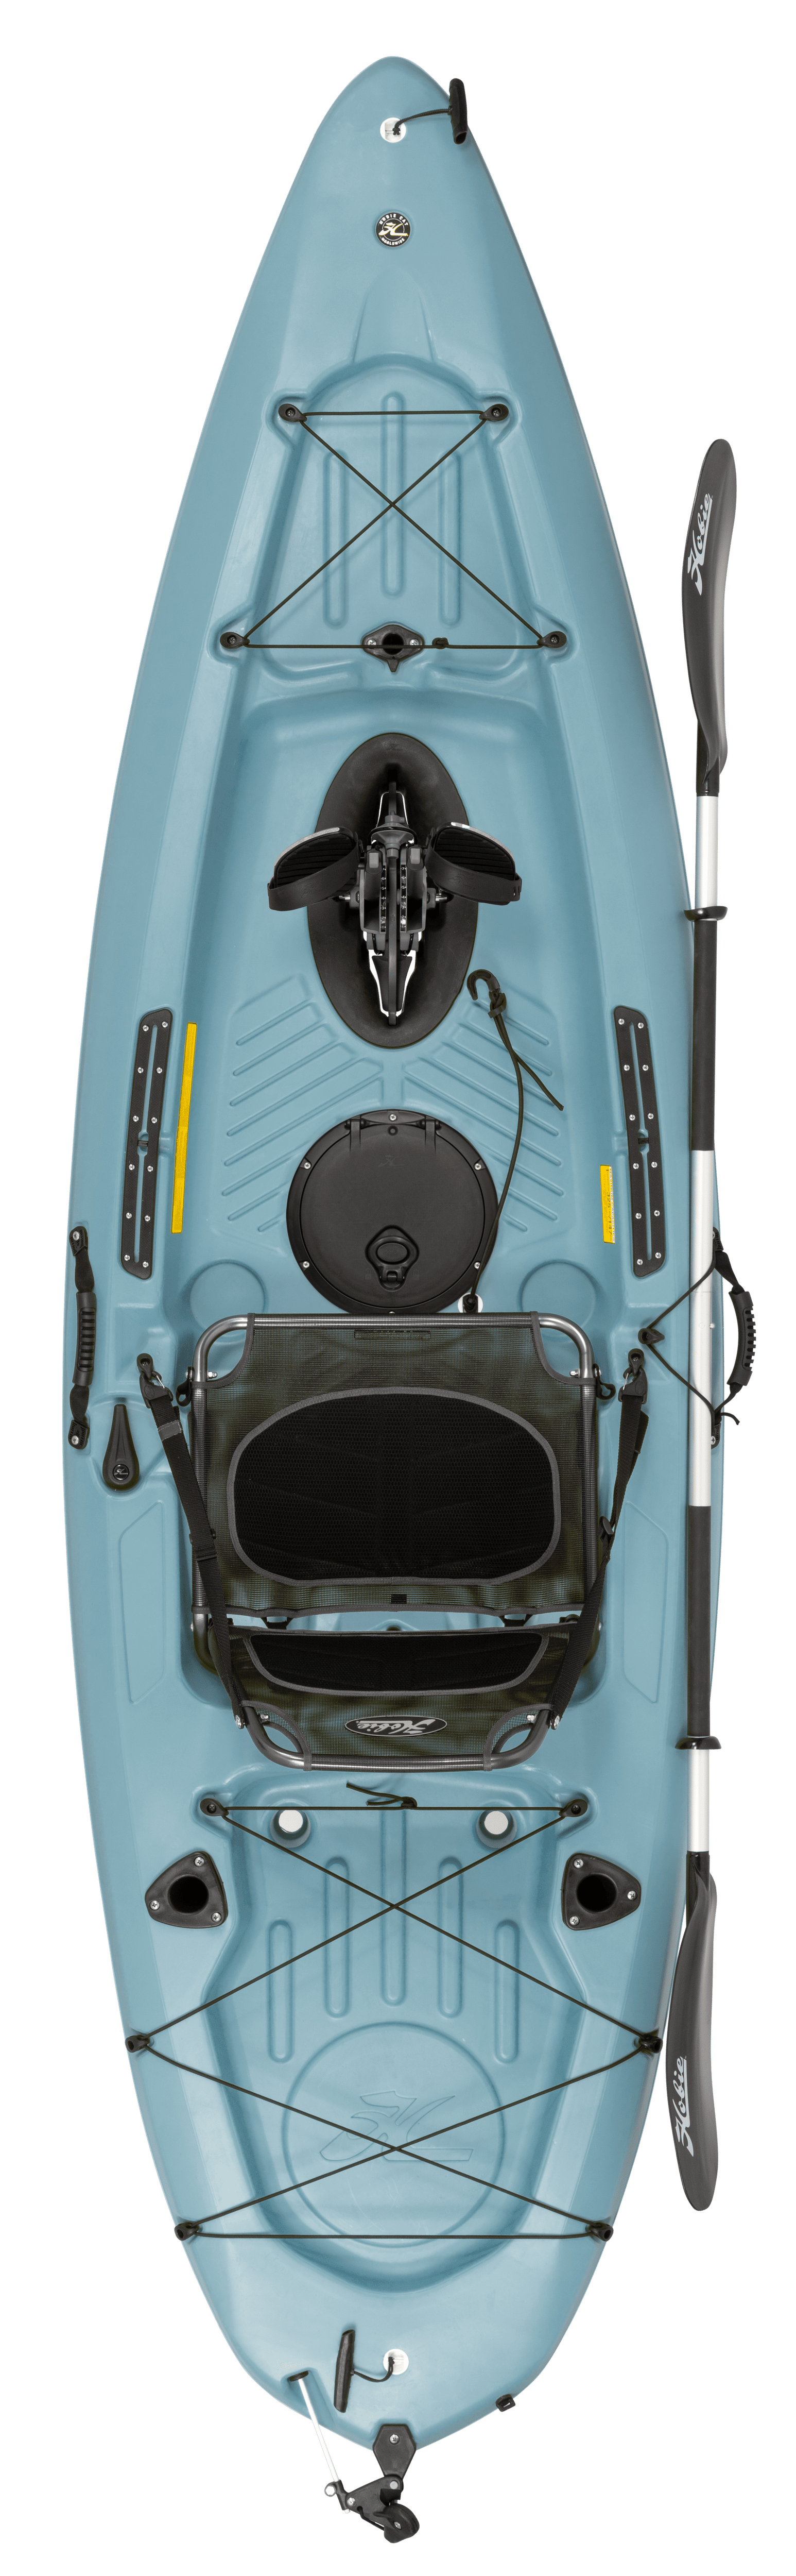 Hobie Passport 10.5 top view showing deck layout and standard features. Colour: Slate Blue